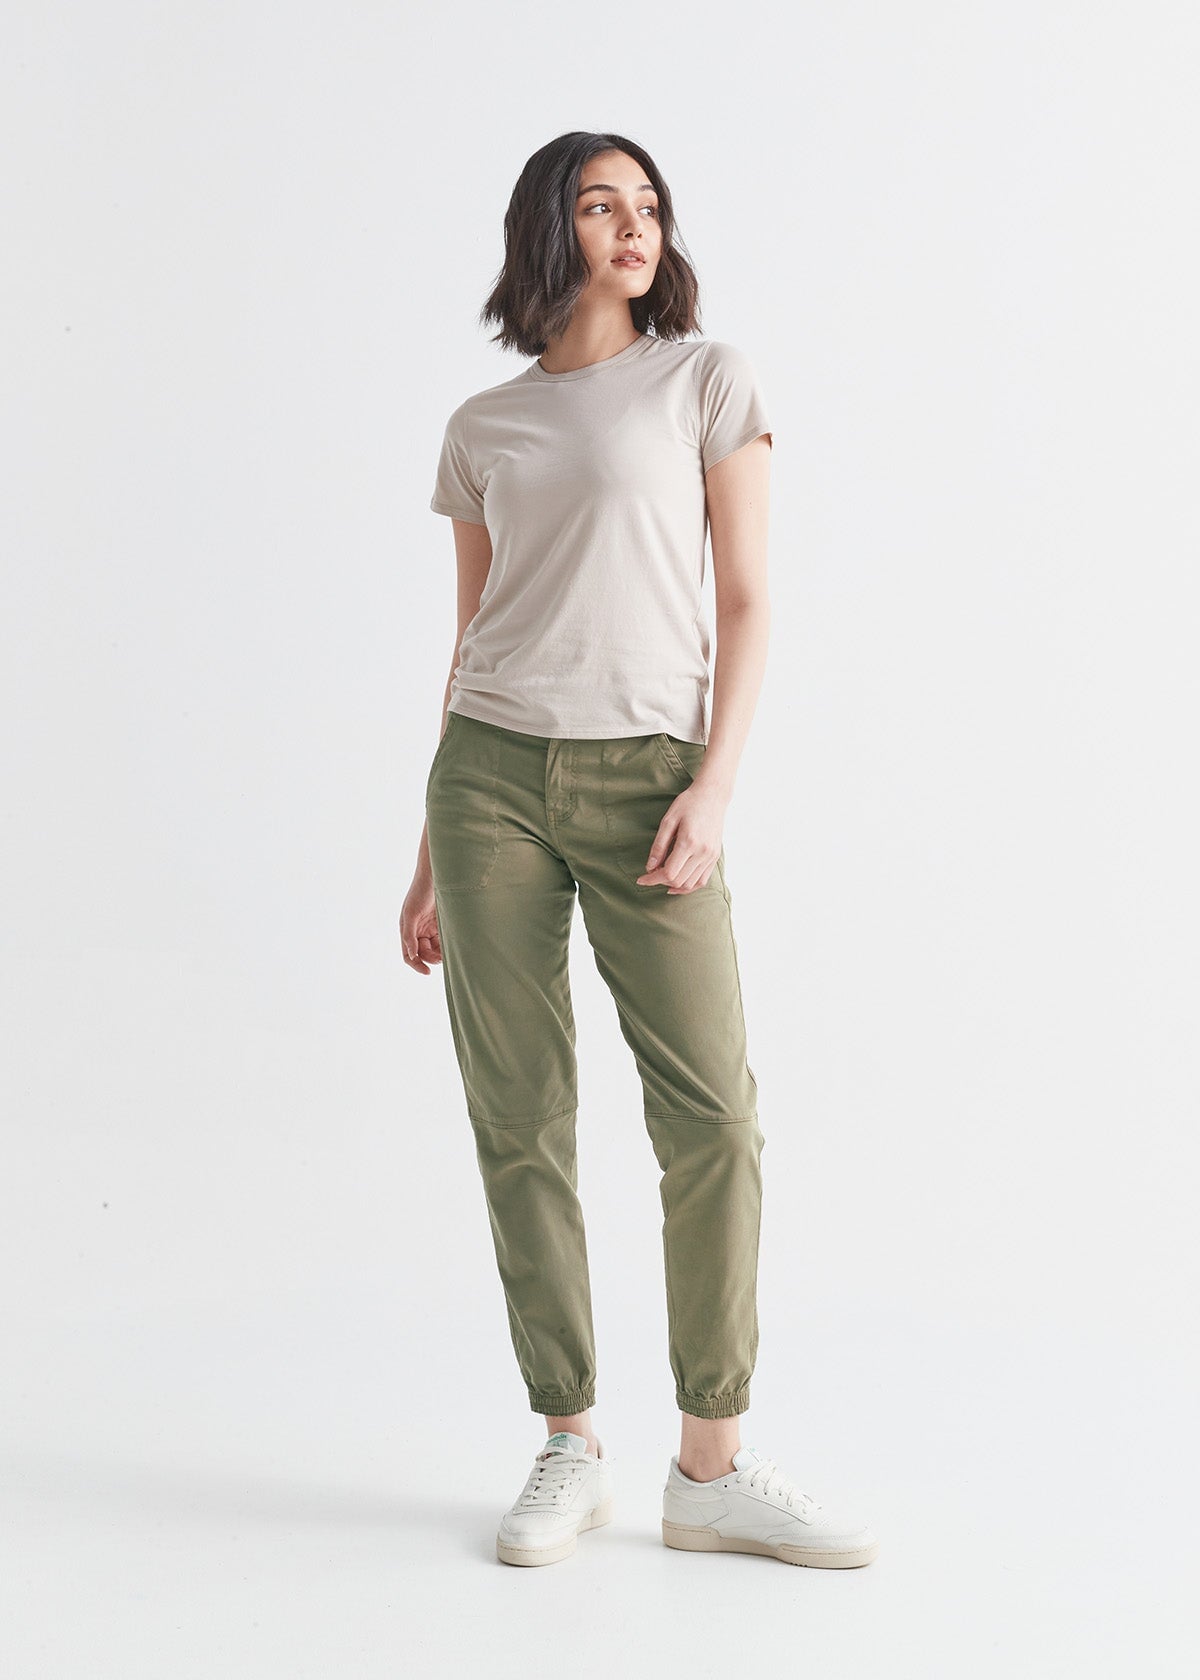 nsendm Female Pants Adult Running Pants in Bulk Womens Cotton Casual Loose  Pants Comfy Work Pants with Pockets Women Elastic Waist Pants(Beige, S)